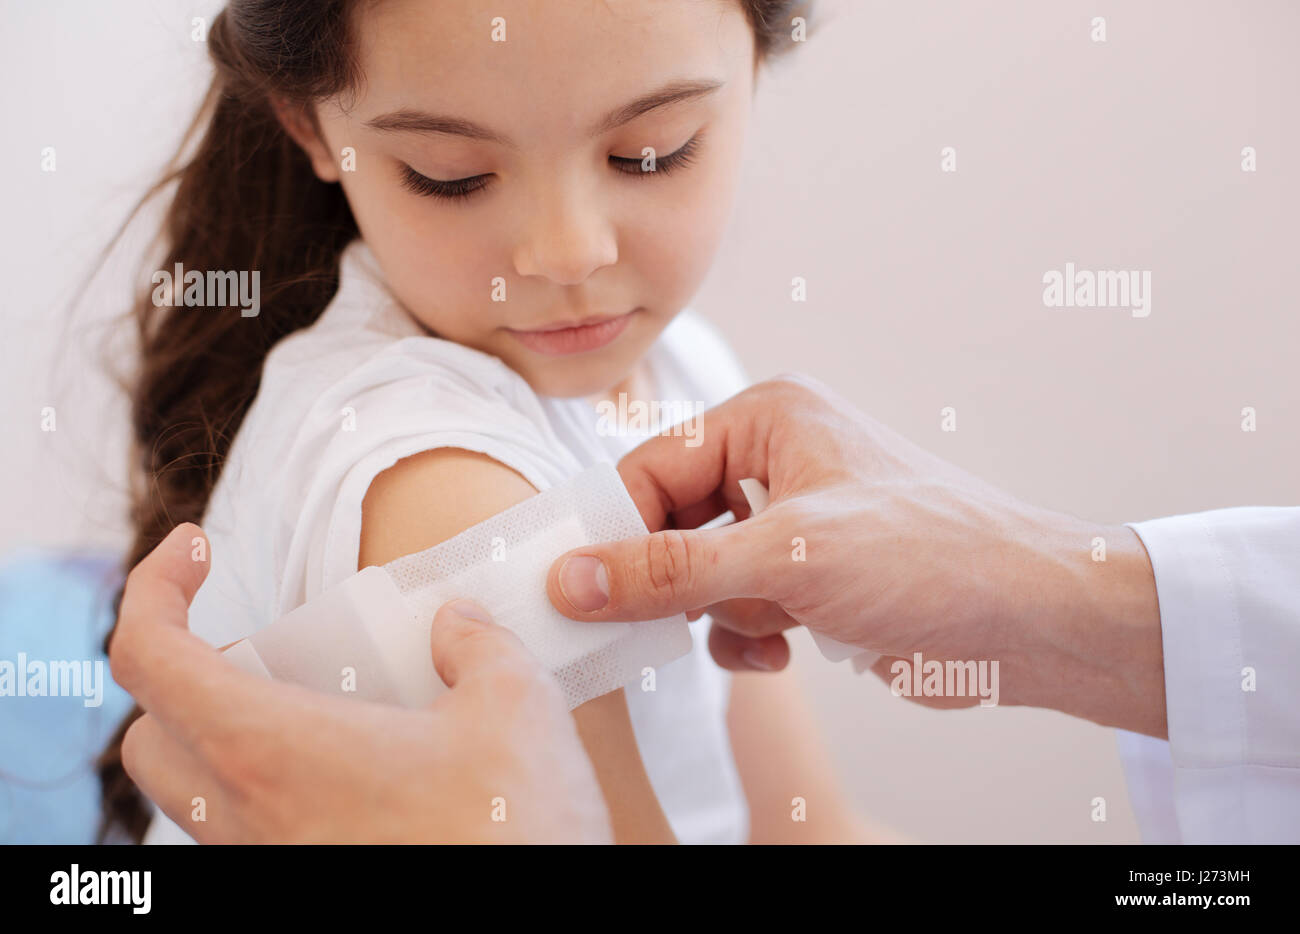 Shoulder injury. Nice professional male doctor holding a plaster and putting it on the girls shoulder while treating her wound Stock Photo